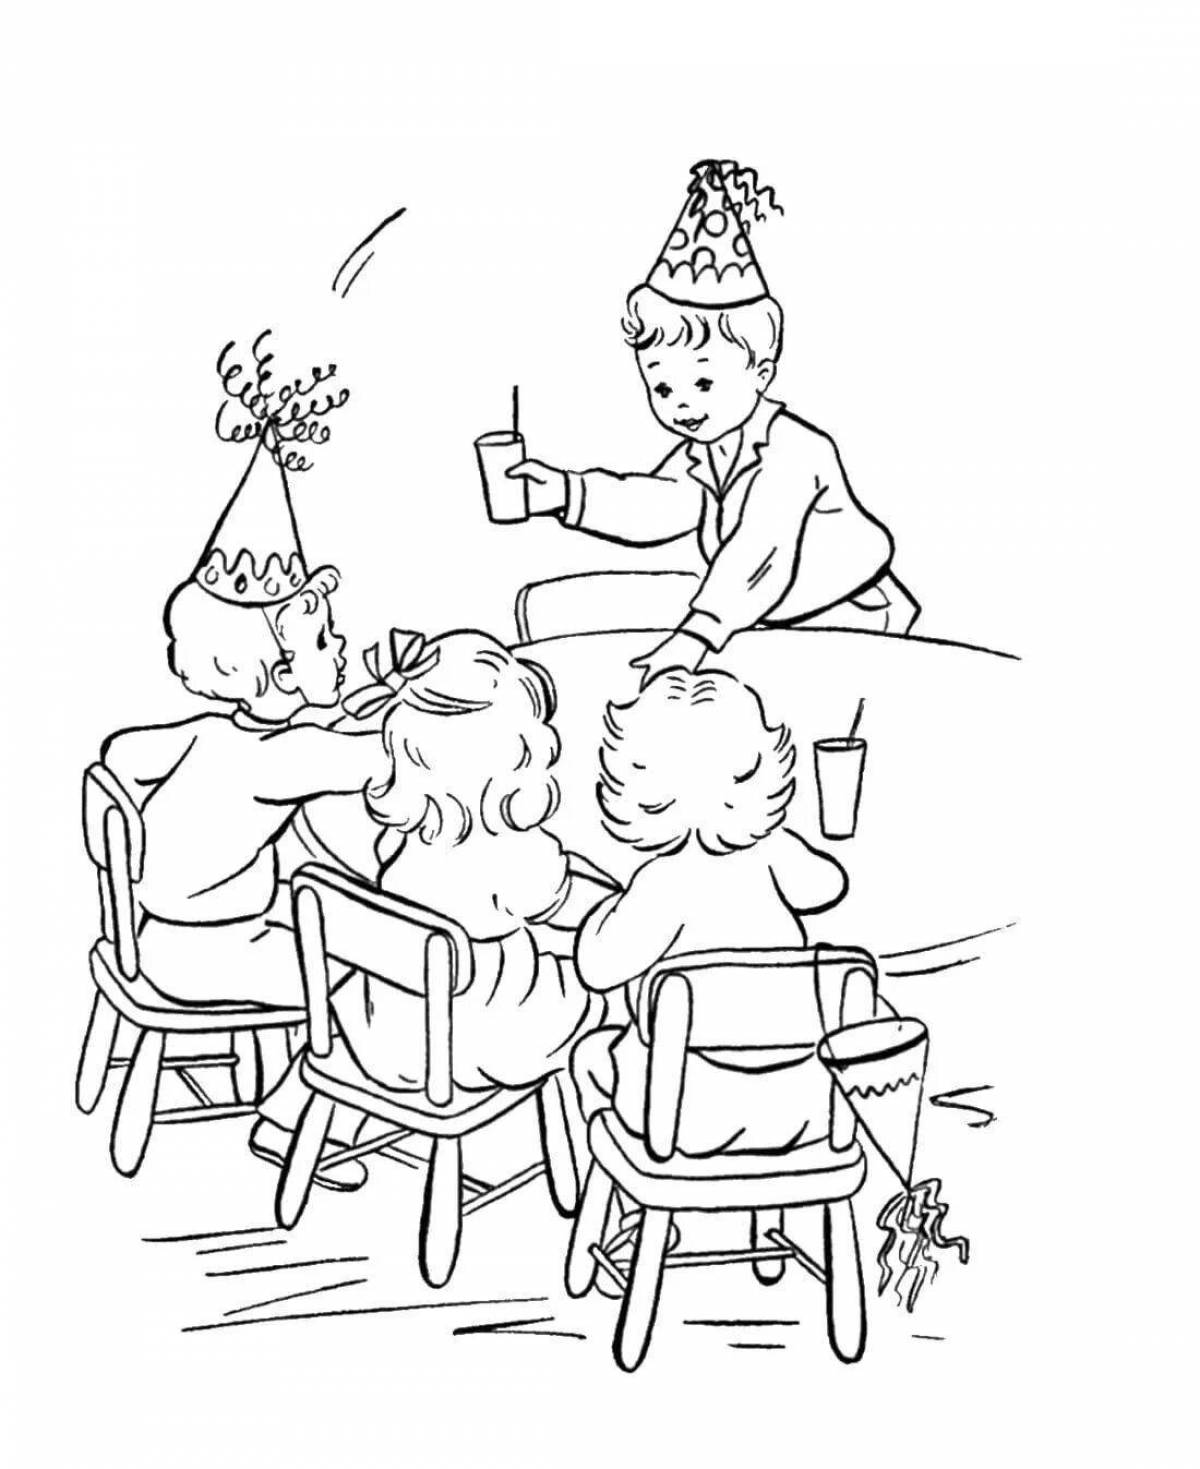 Etiquette for children 6 7 years old #7